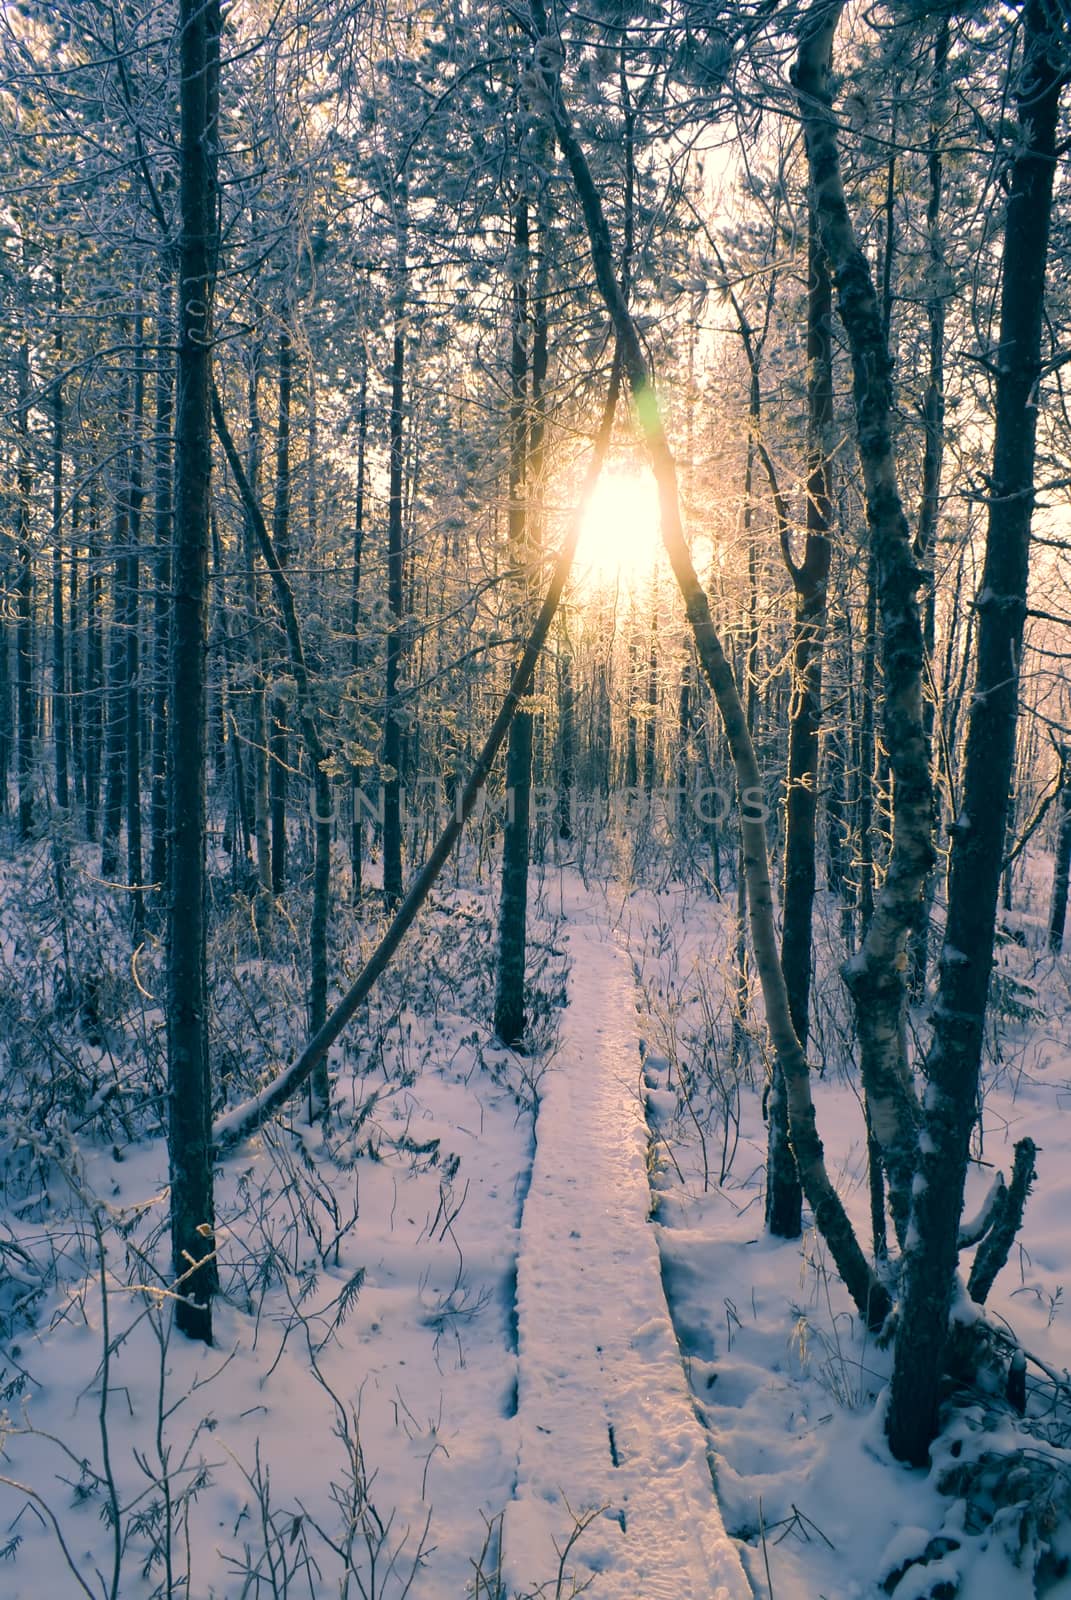 Winter sun in a forest by MichalKnitl